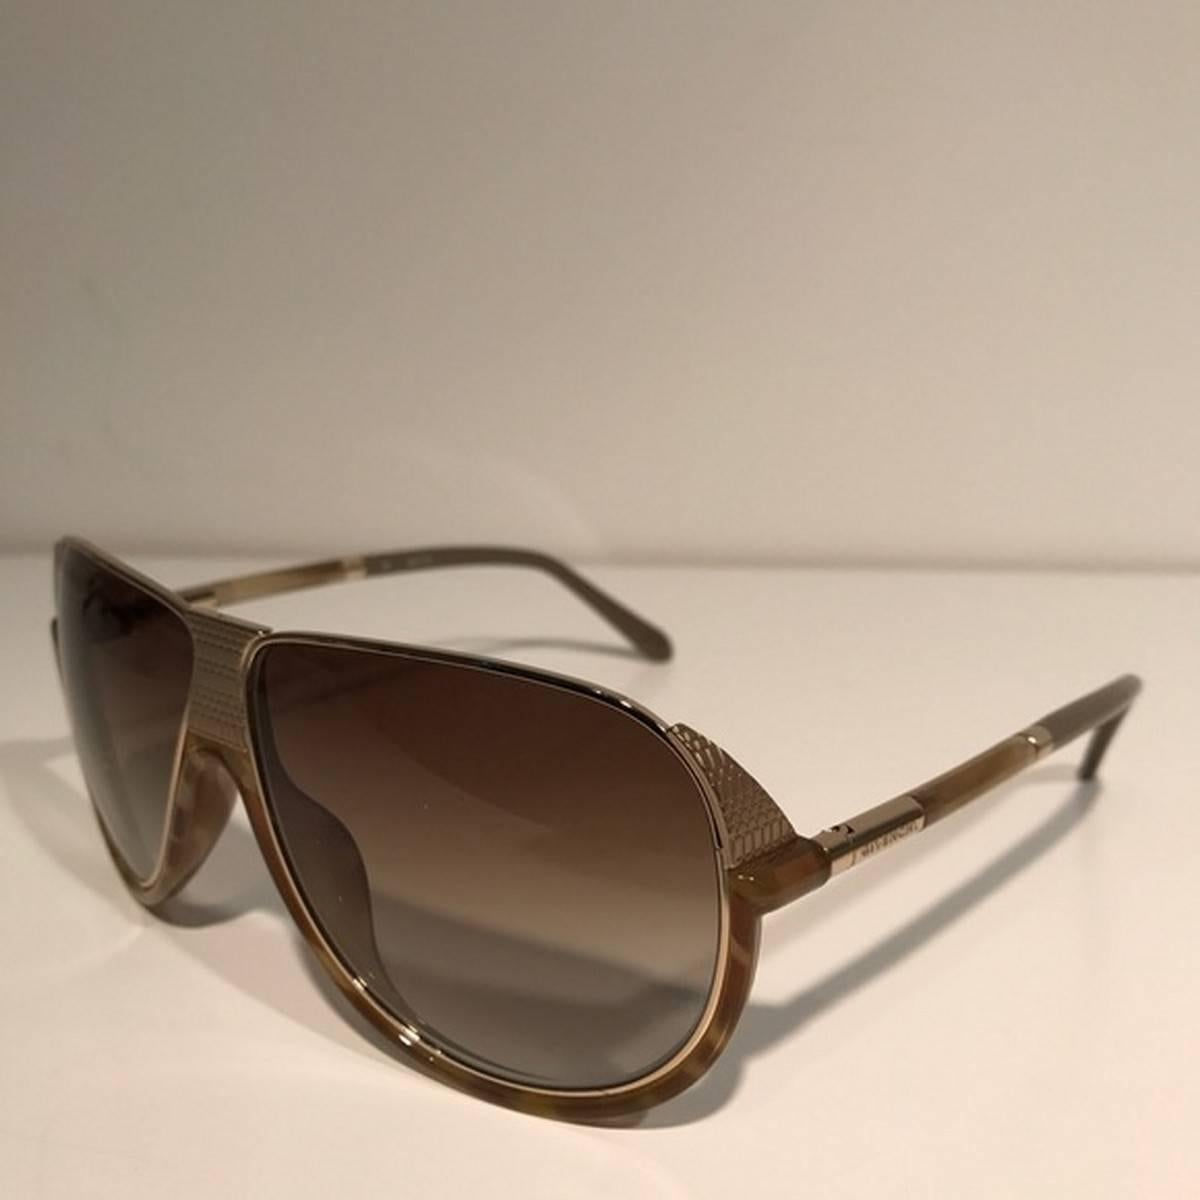 Givenchy Gold Aviator Sunglasses with horn
Color: Gold
Size: OS

Brand new with box.
Unused condition.
No flaws.
Made in Italy.